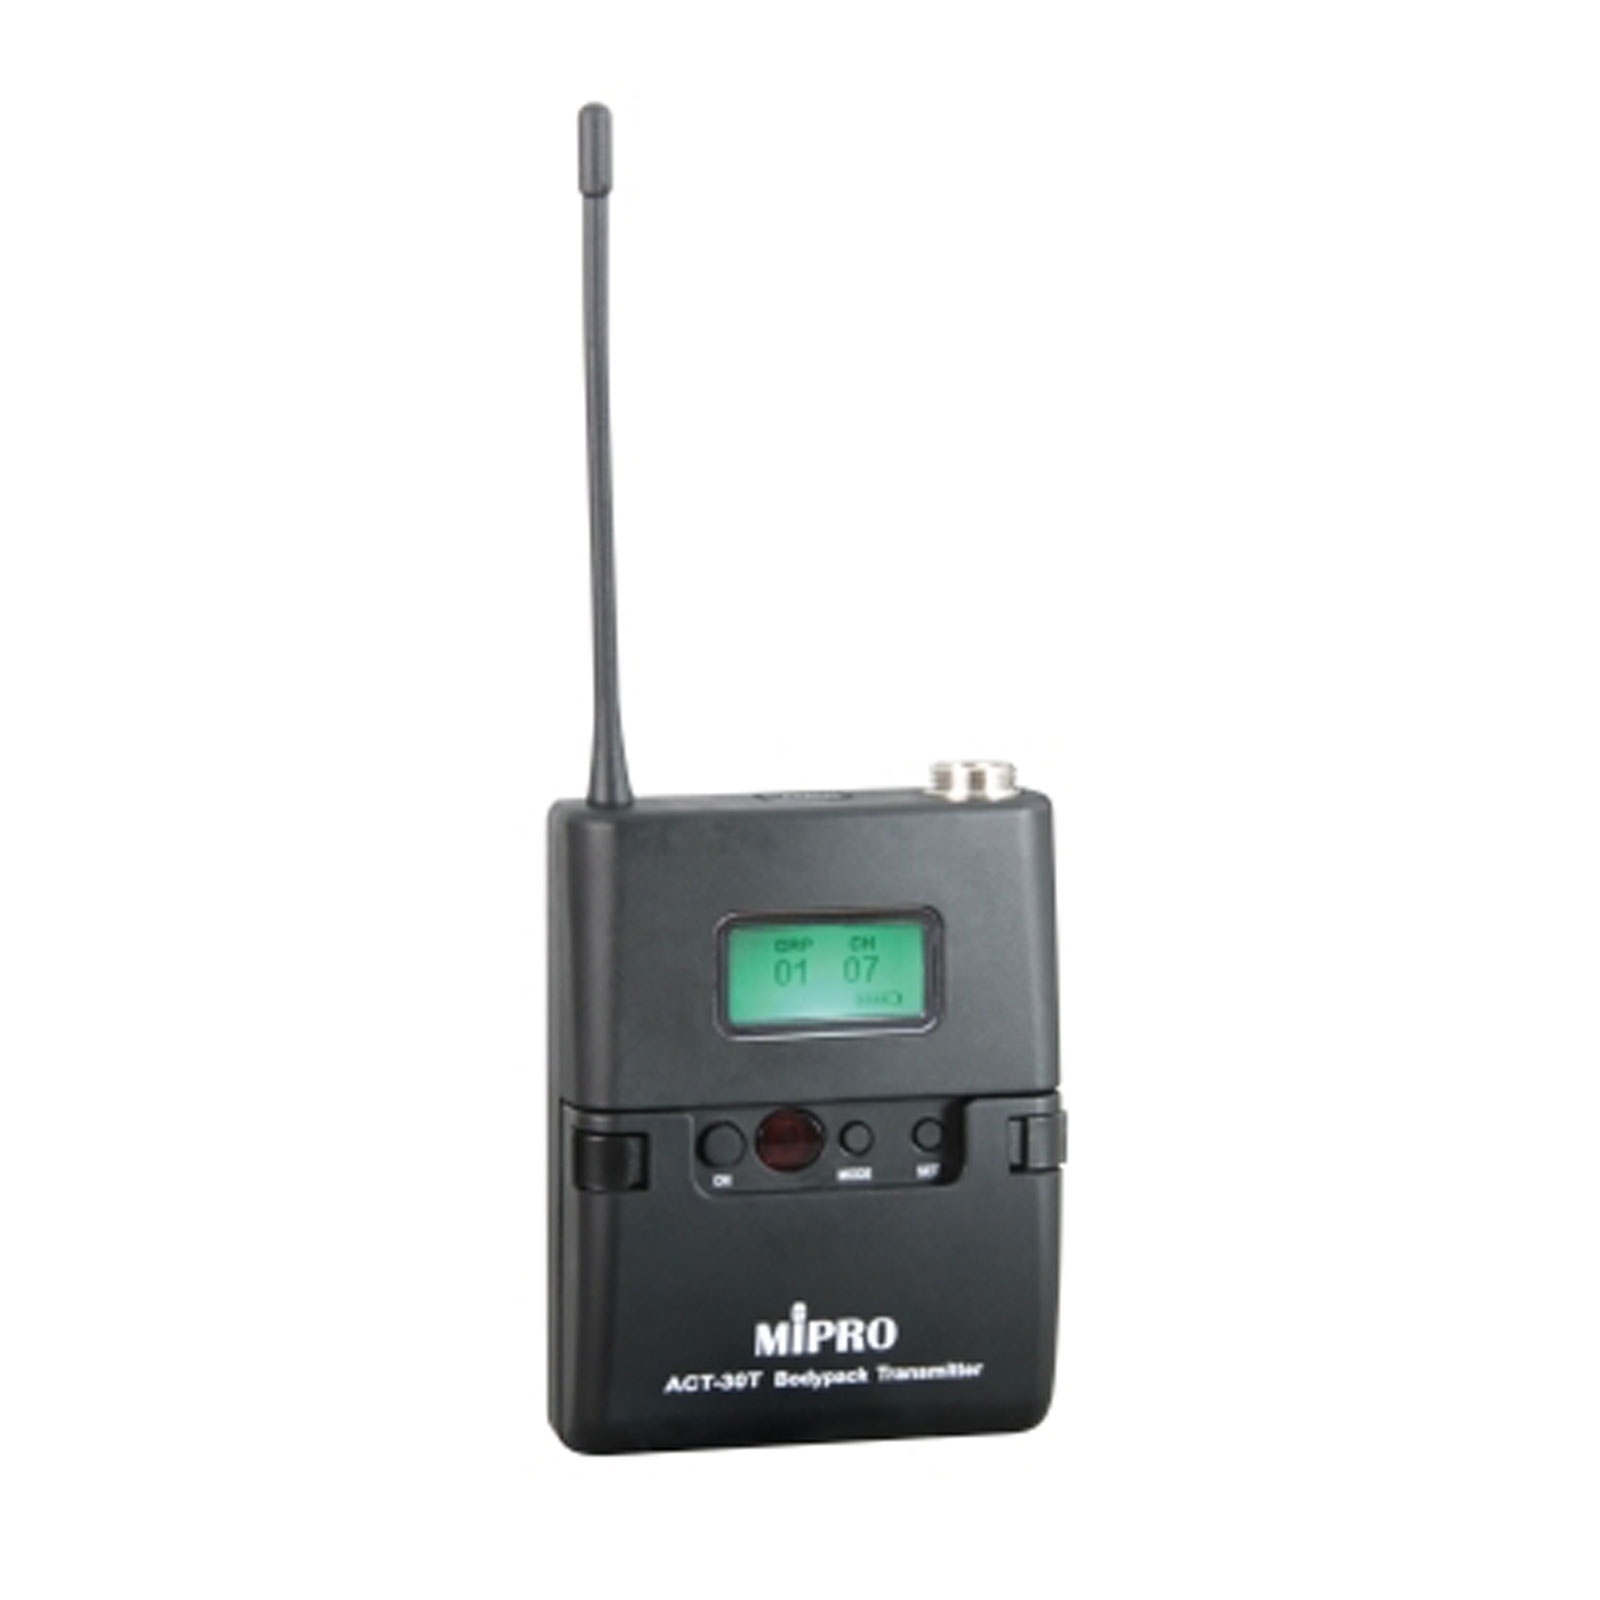 MIPRO ACT30T Beltpack Transmitter - 6B frequency (626-668MHz)